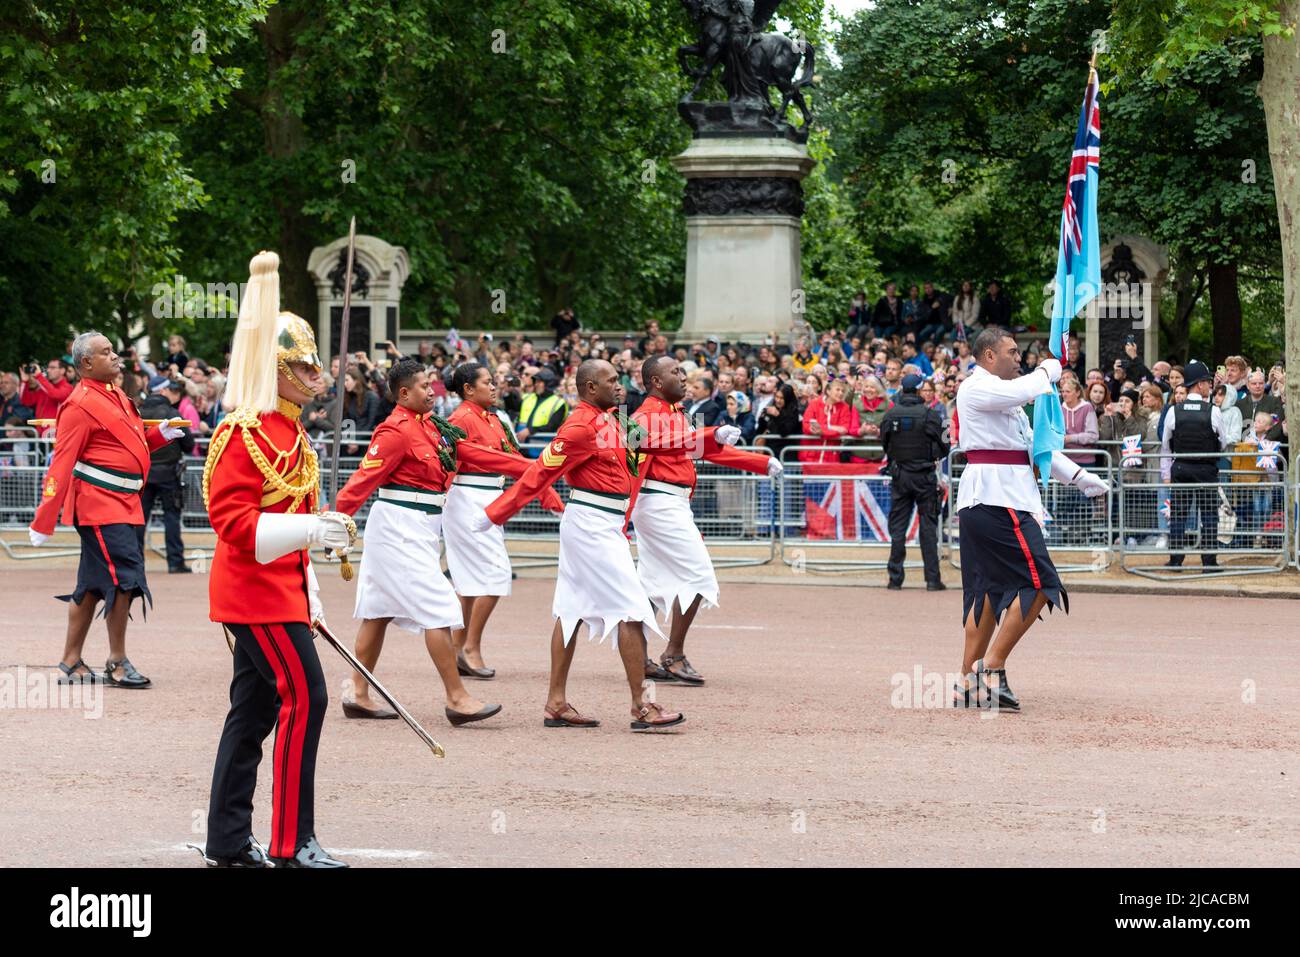 Fidschi-Gruppe marschiert in der Commonwealth-Sektion des for Queen and Country Act von Platinum Jubilee Pageant, The Mall, London Stockfoto